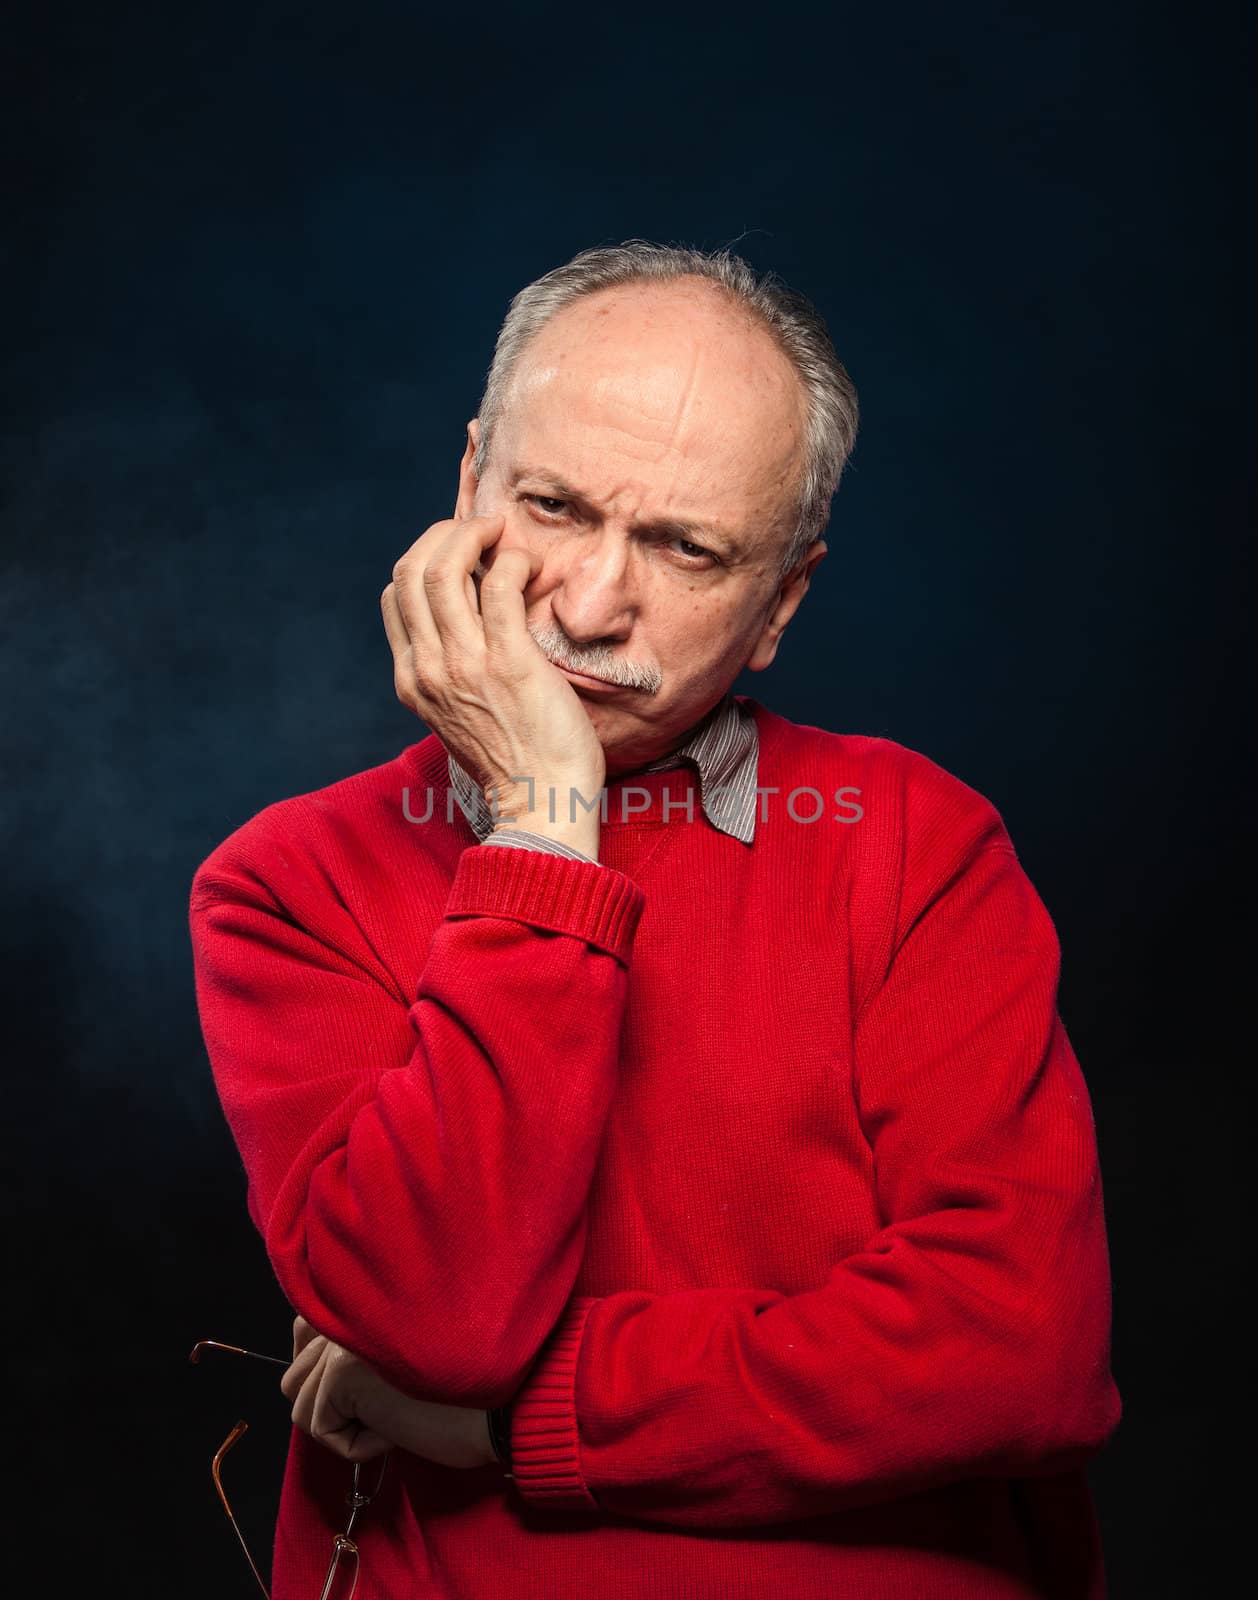 Portrait of a thoughtful elderly man with glasses in a red sweater